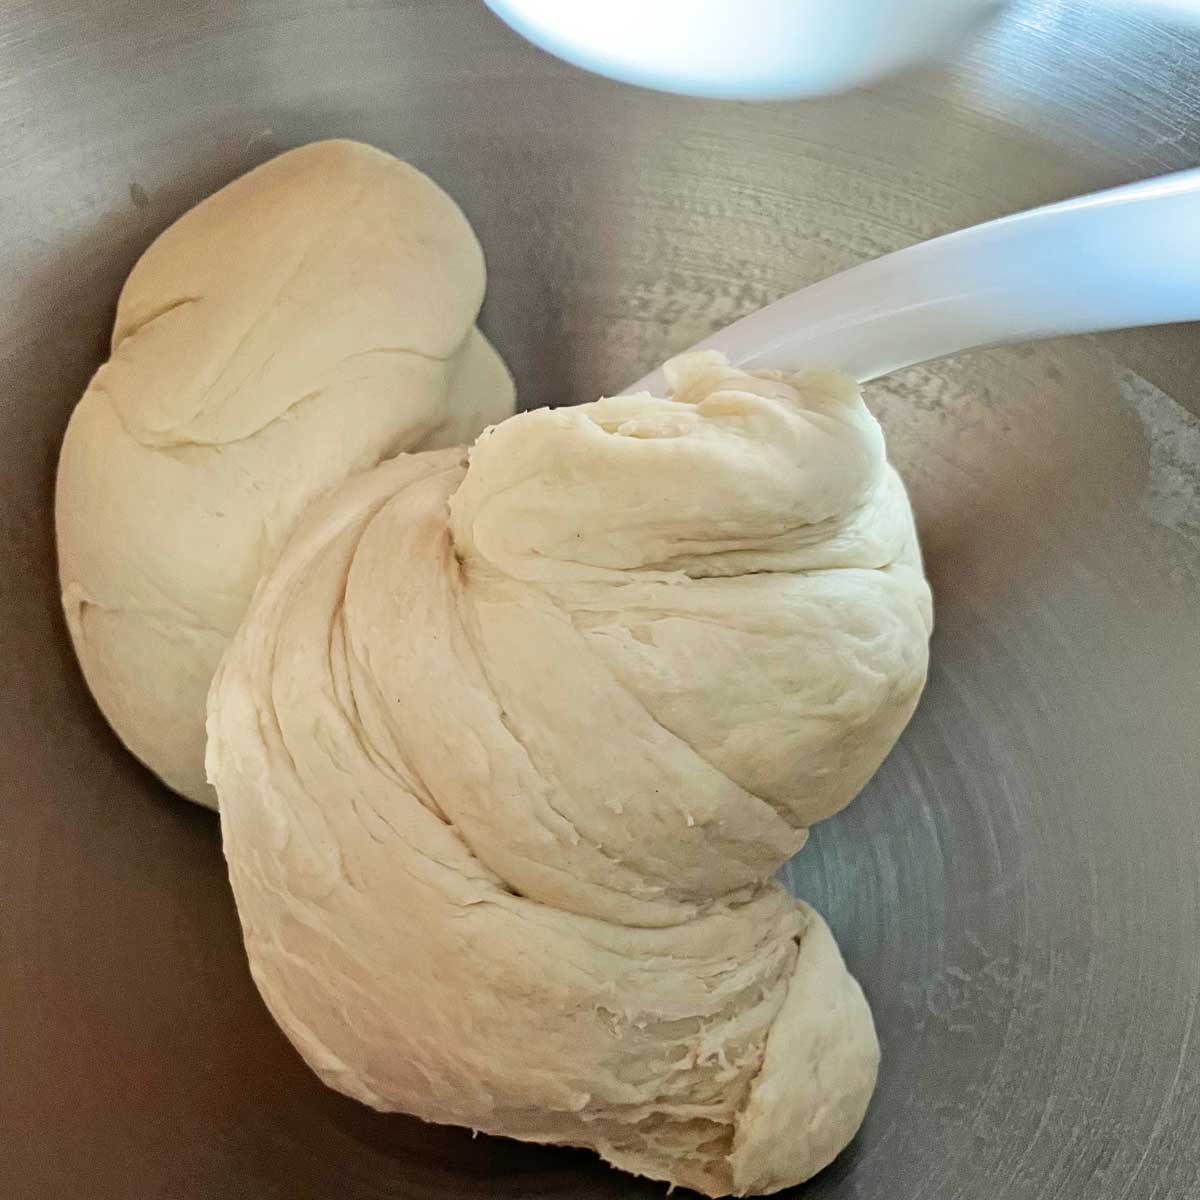 Pizza dough in stand mixer